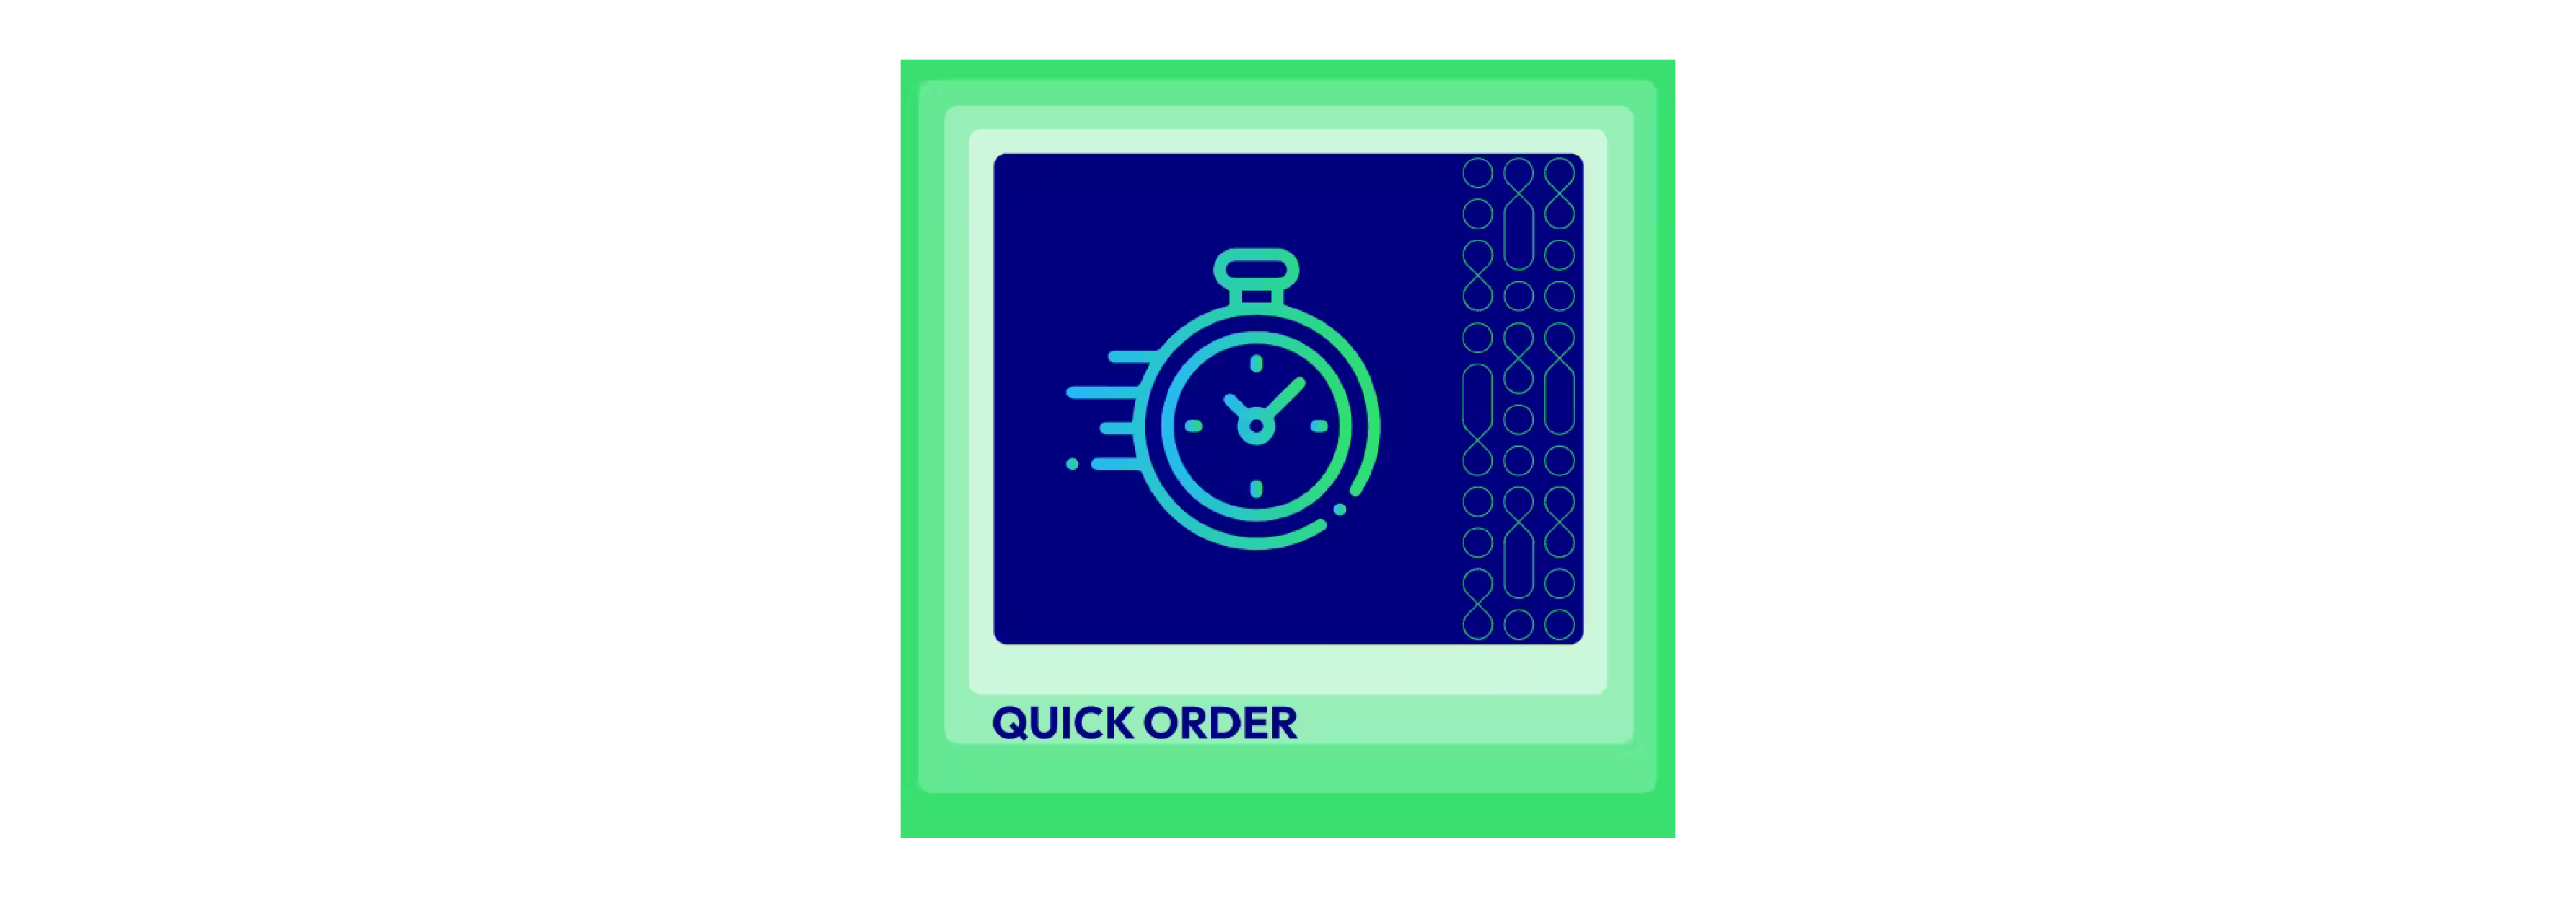 Magento 2 Quick Order by Mageplaza extension